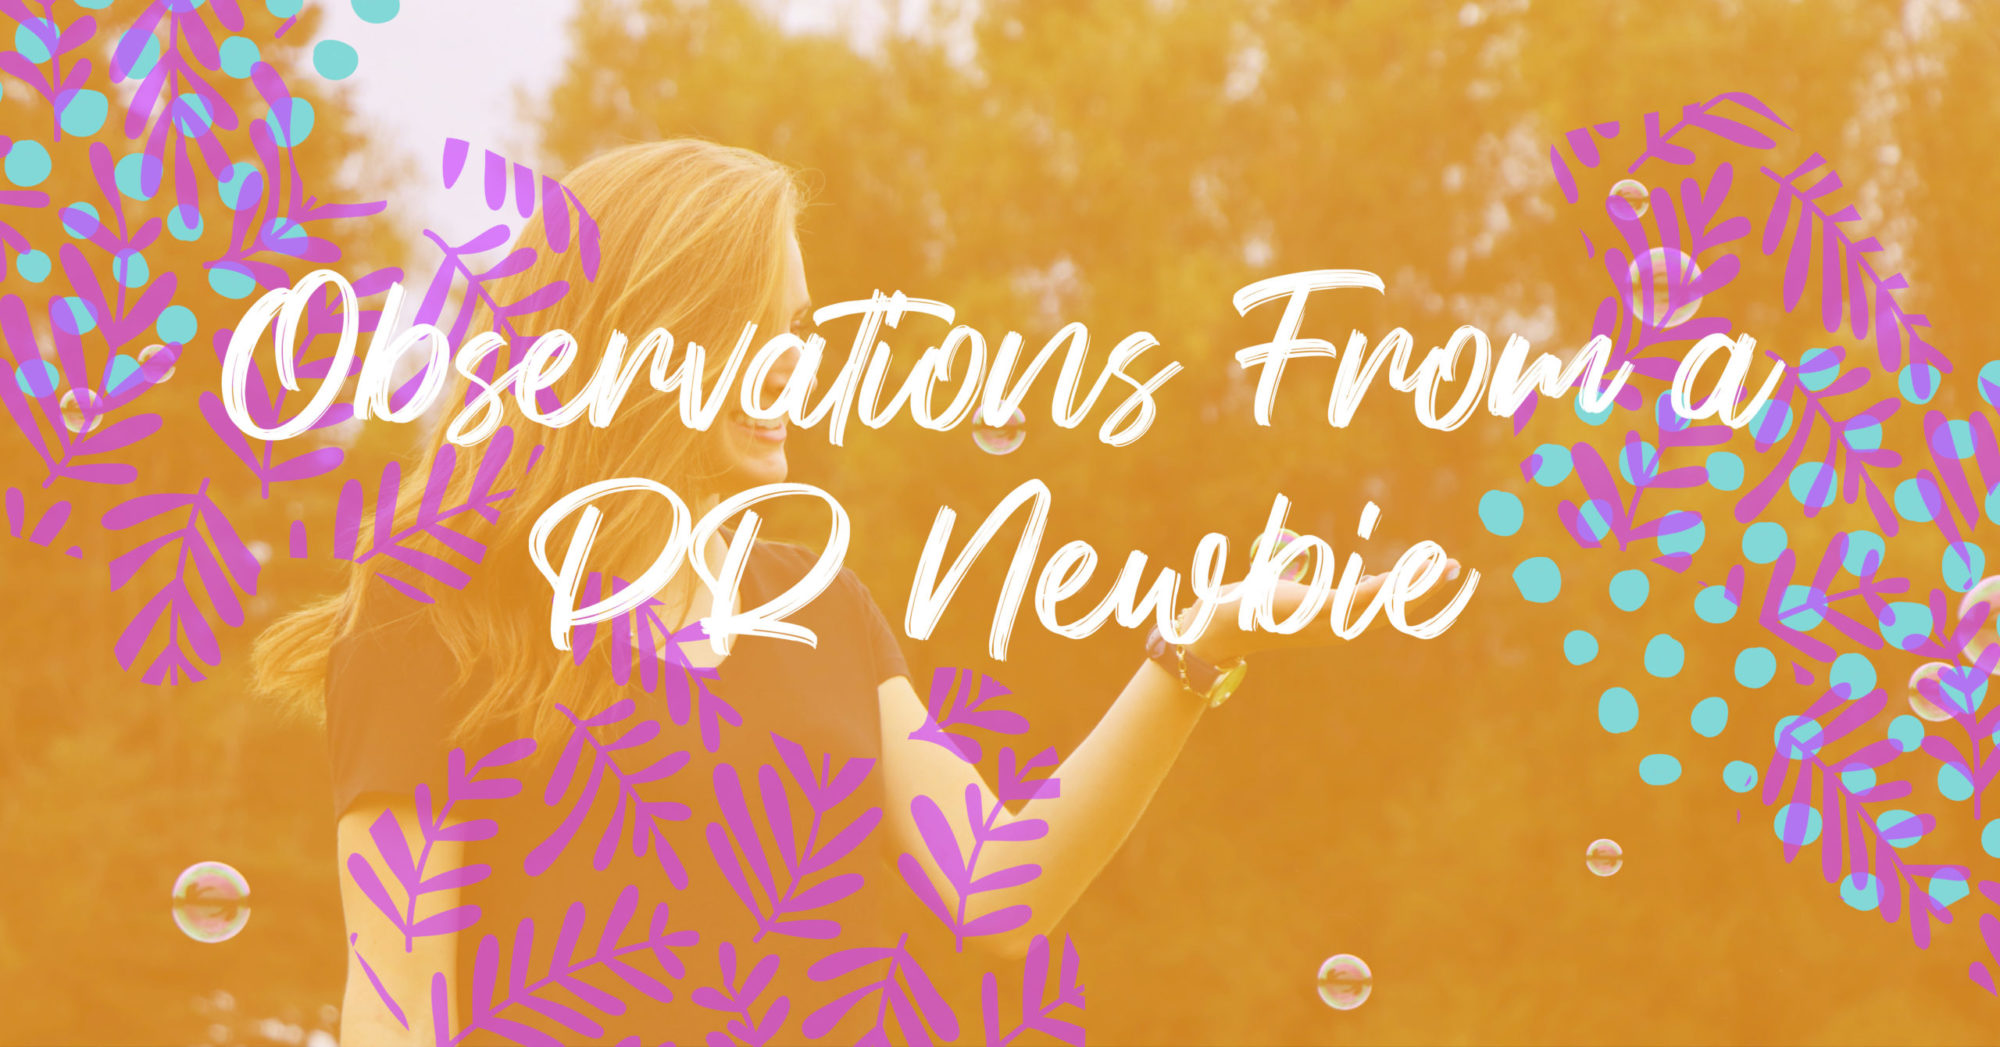 Orange and Pink transparent overlay of a young woman outside with bubbles with the words "Observations From a PR Newbie" in white text